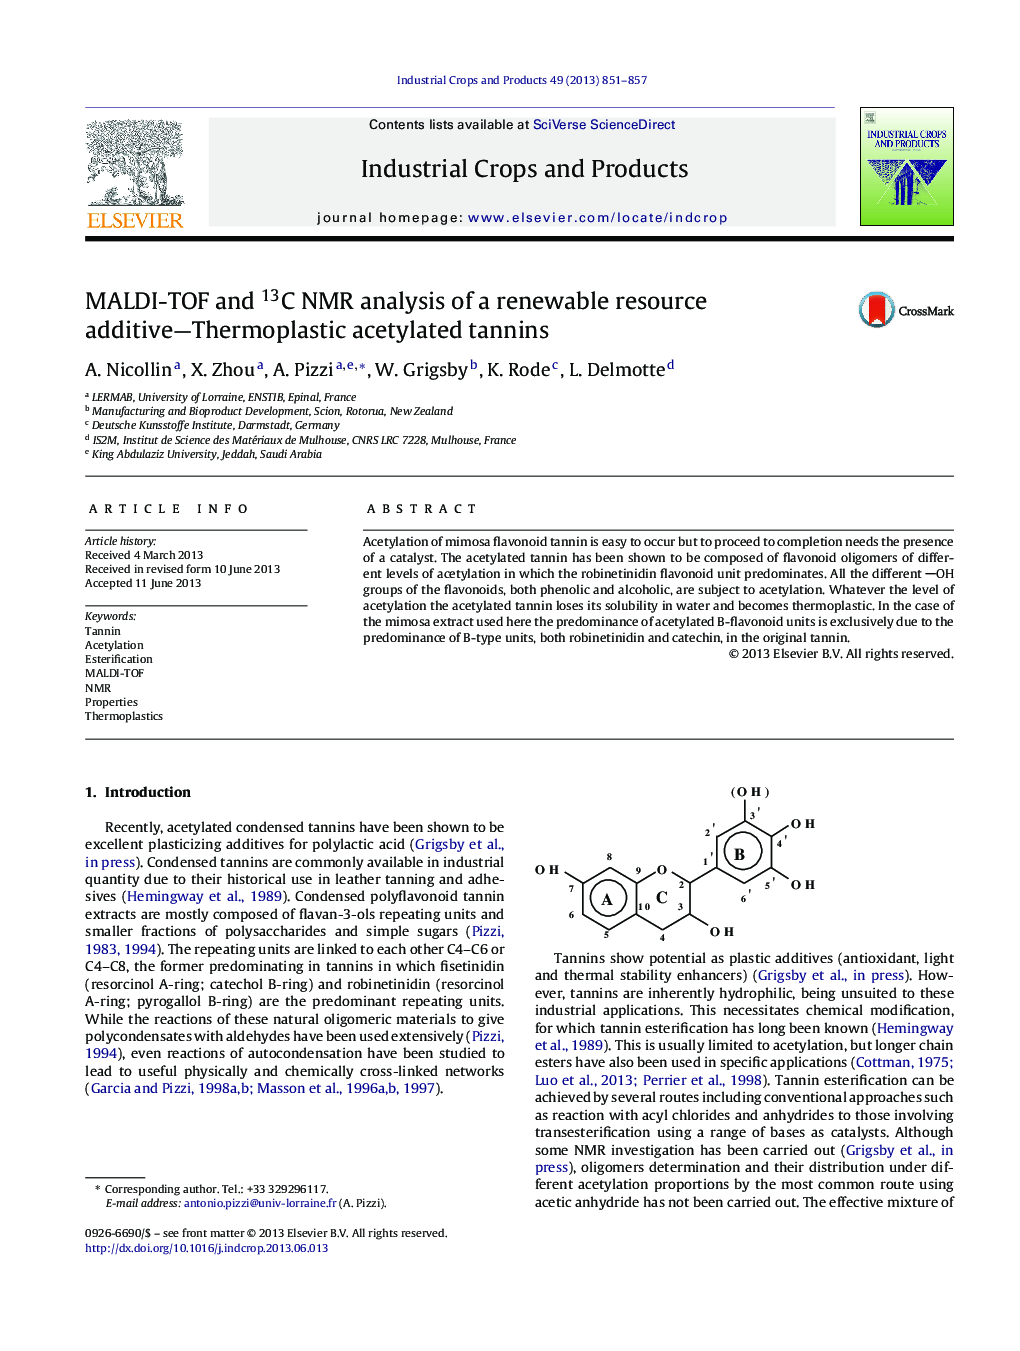 MALDI-TOF and 13C NMR analysis of a renewable resource additive-Thermoplastic acetylated tannins